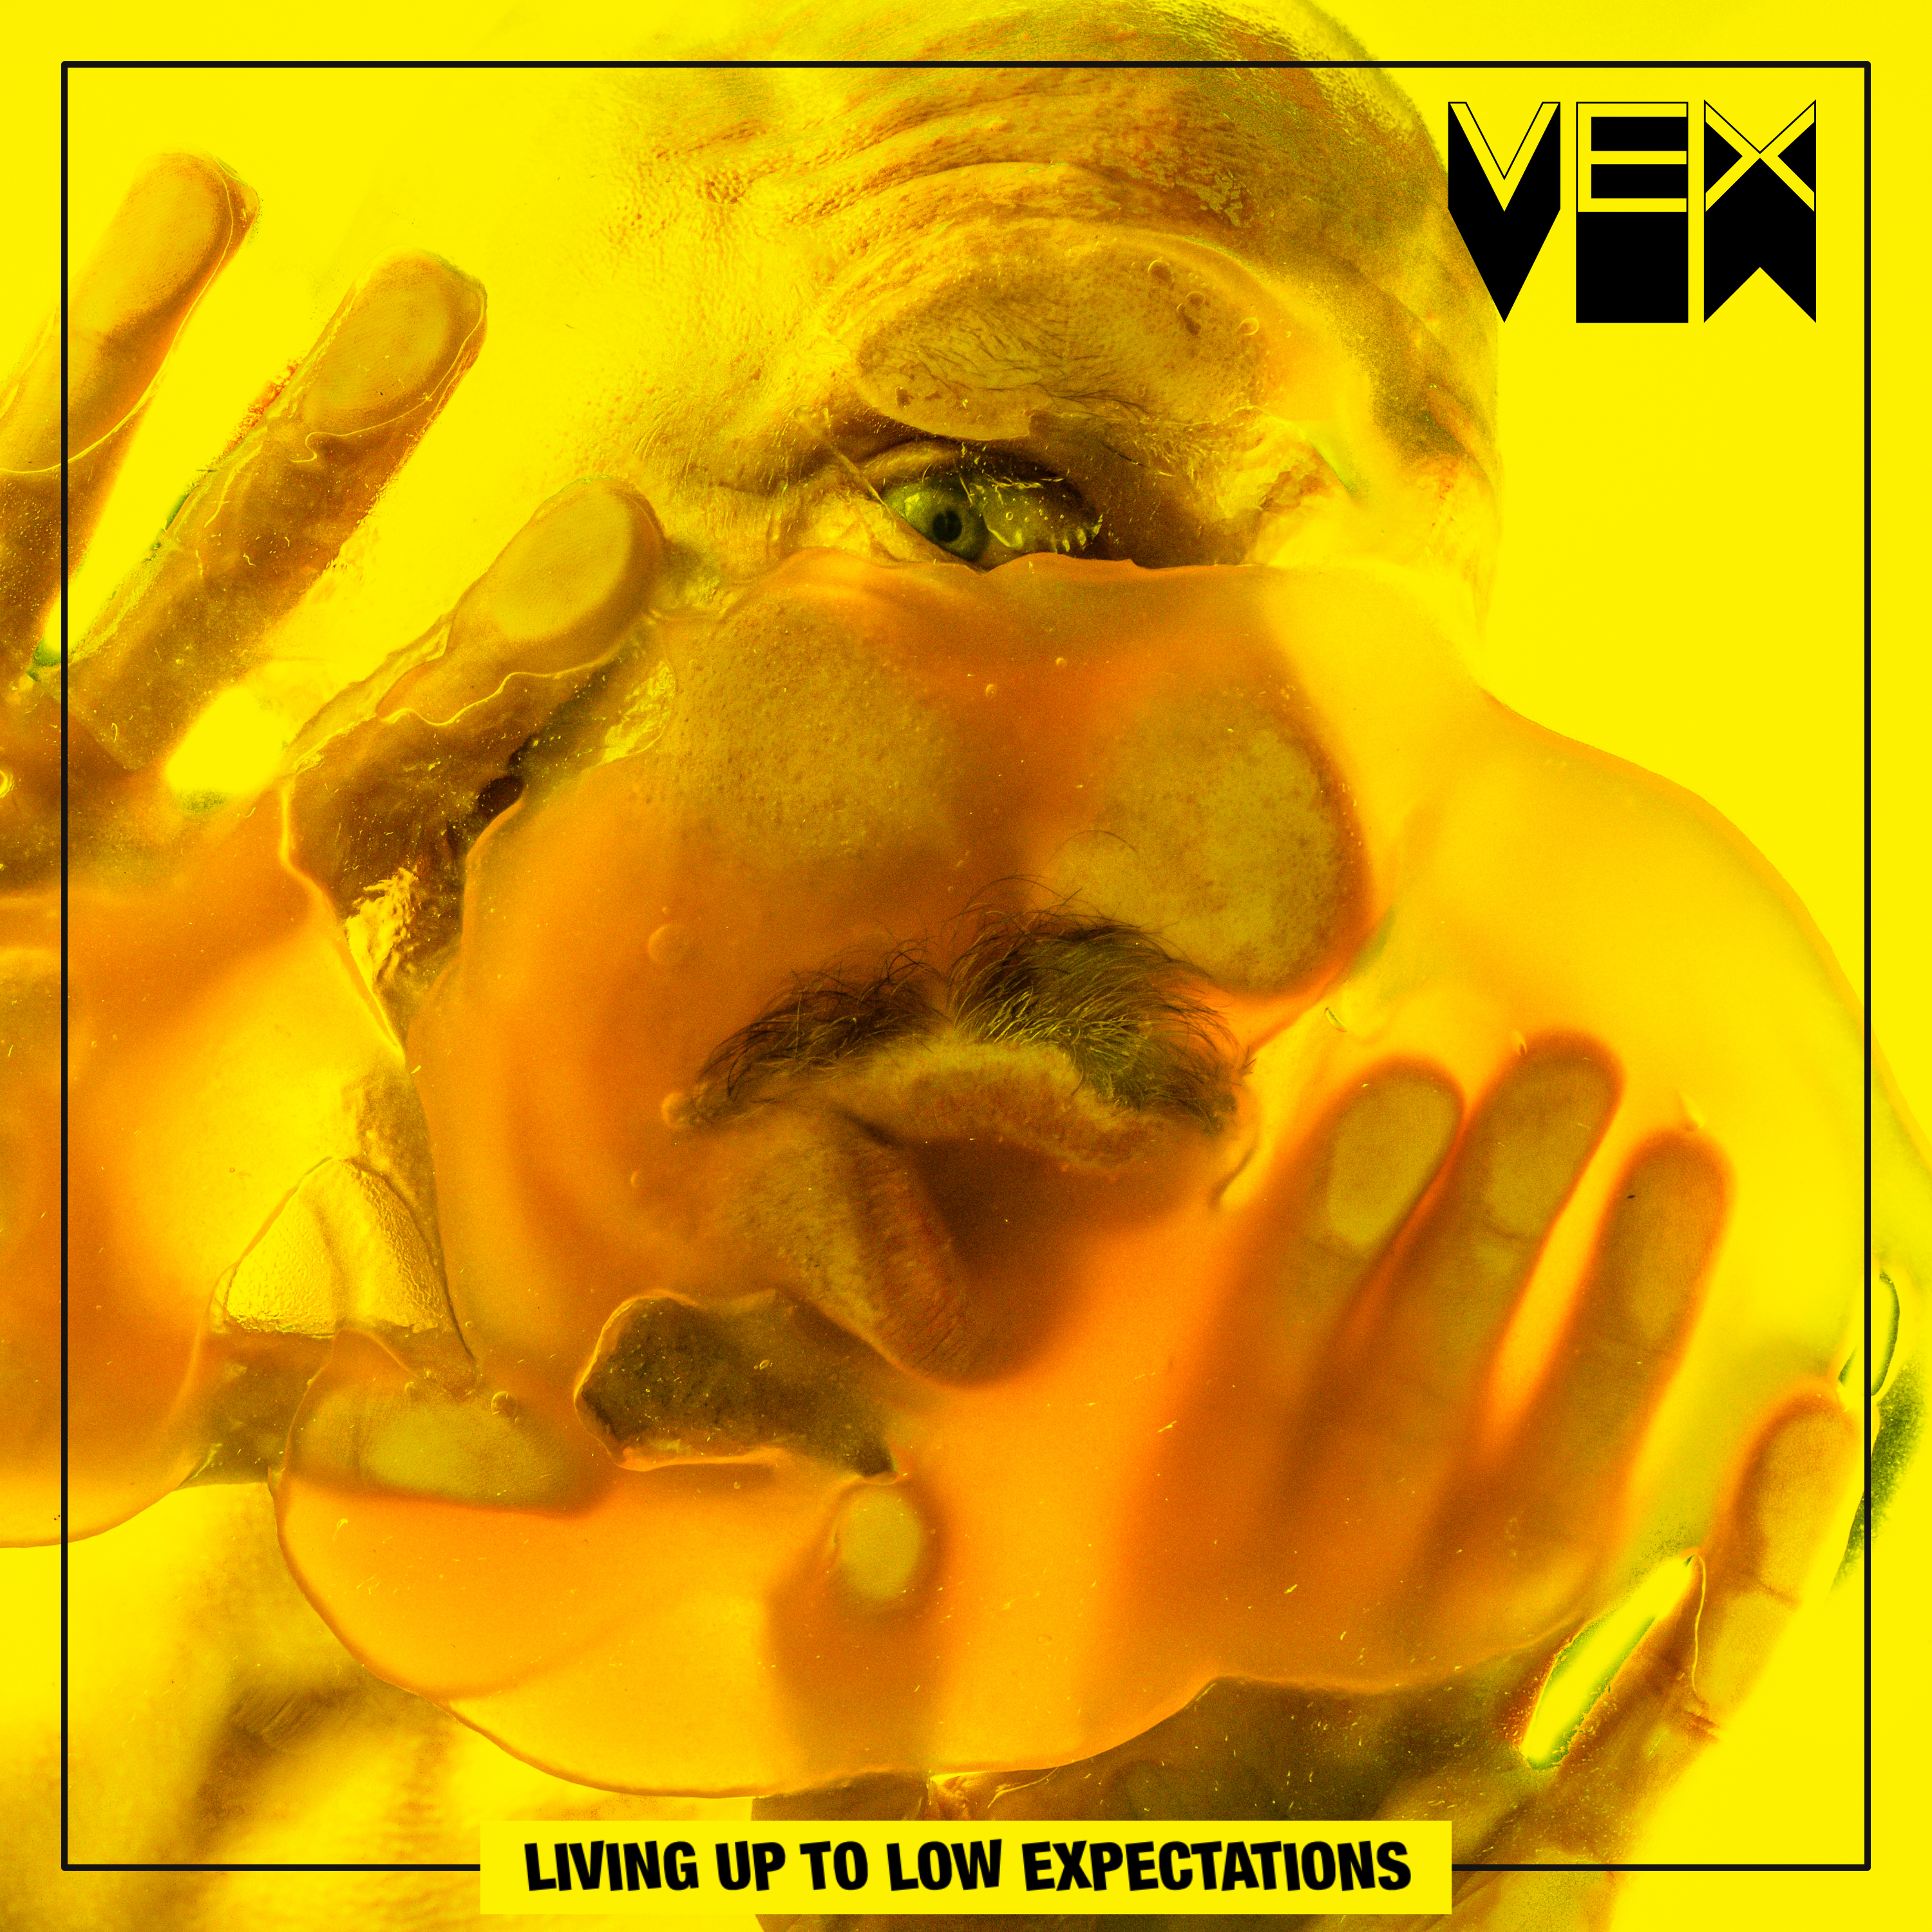 VEX - Living up to low expectations (Yellow Vinyl) - LP